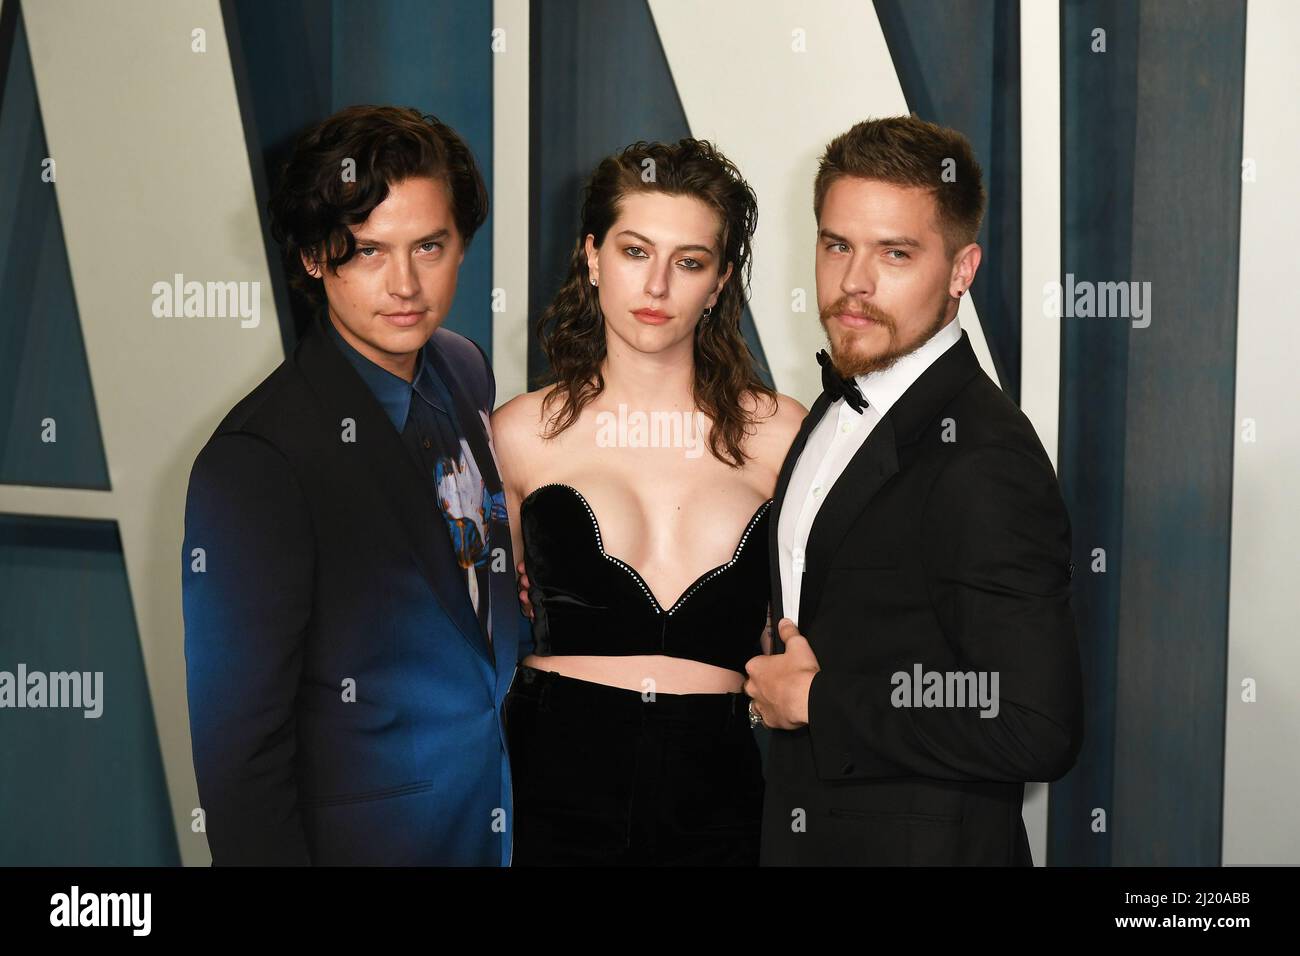 Beverly Hills, USA. 27th Mar, 2022. Cole Sprouse, King Princess, and Dylan Sprouse attend the 2022 Vanity Fair Oscar Party at the Wallis Annenberg Center for the Performing Arts on March 27, 2022 in Beverly Hills, California. Photo: Casey Flanigan/imageSPACE Credit: Imagespace/Alamy Live News Stock Photo